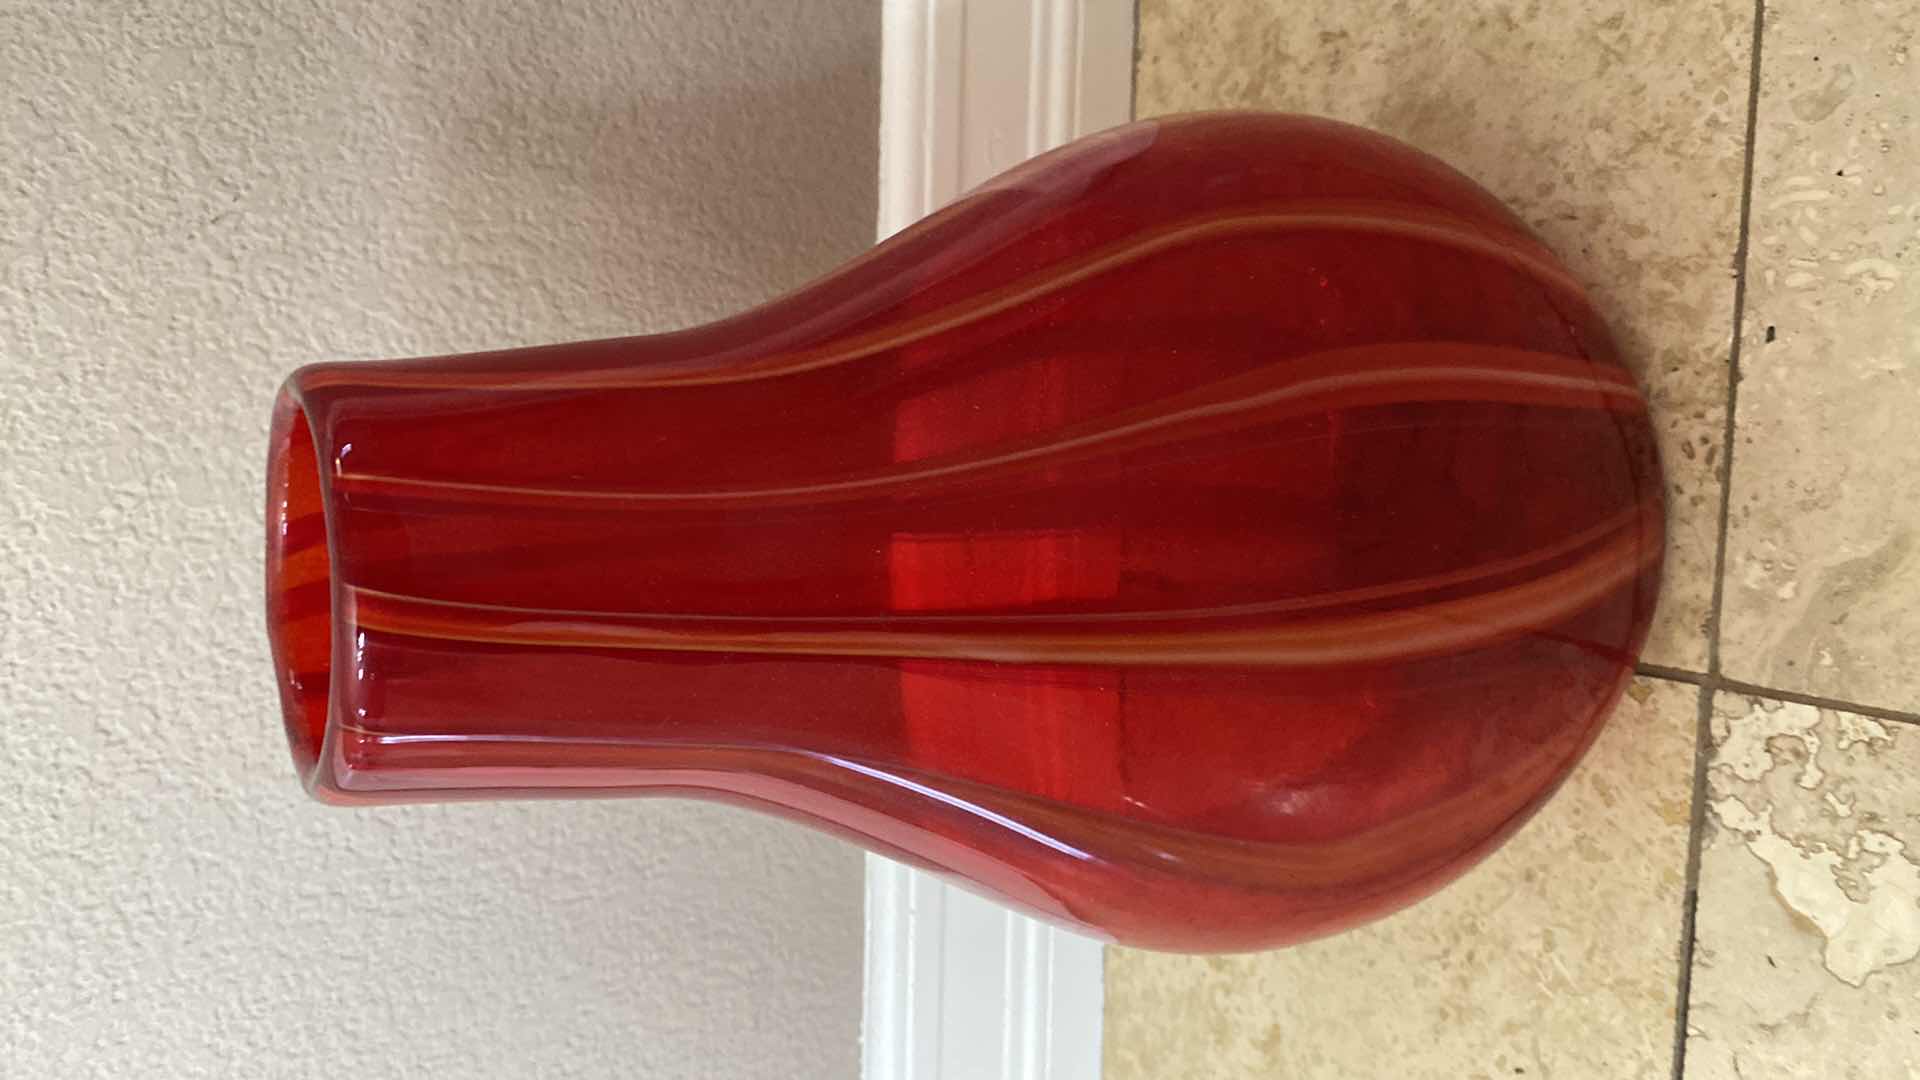 Photo 1 of RED ART GLASS VASE 8 1/2” x 14”